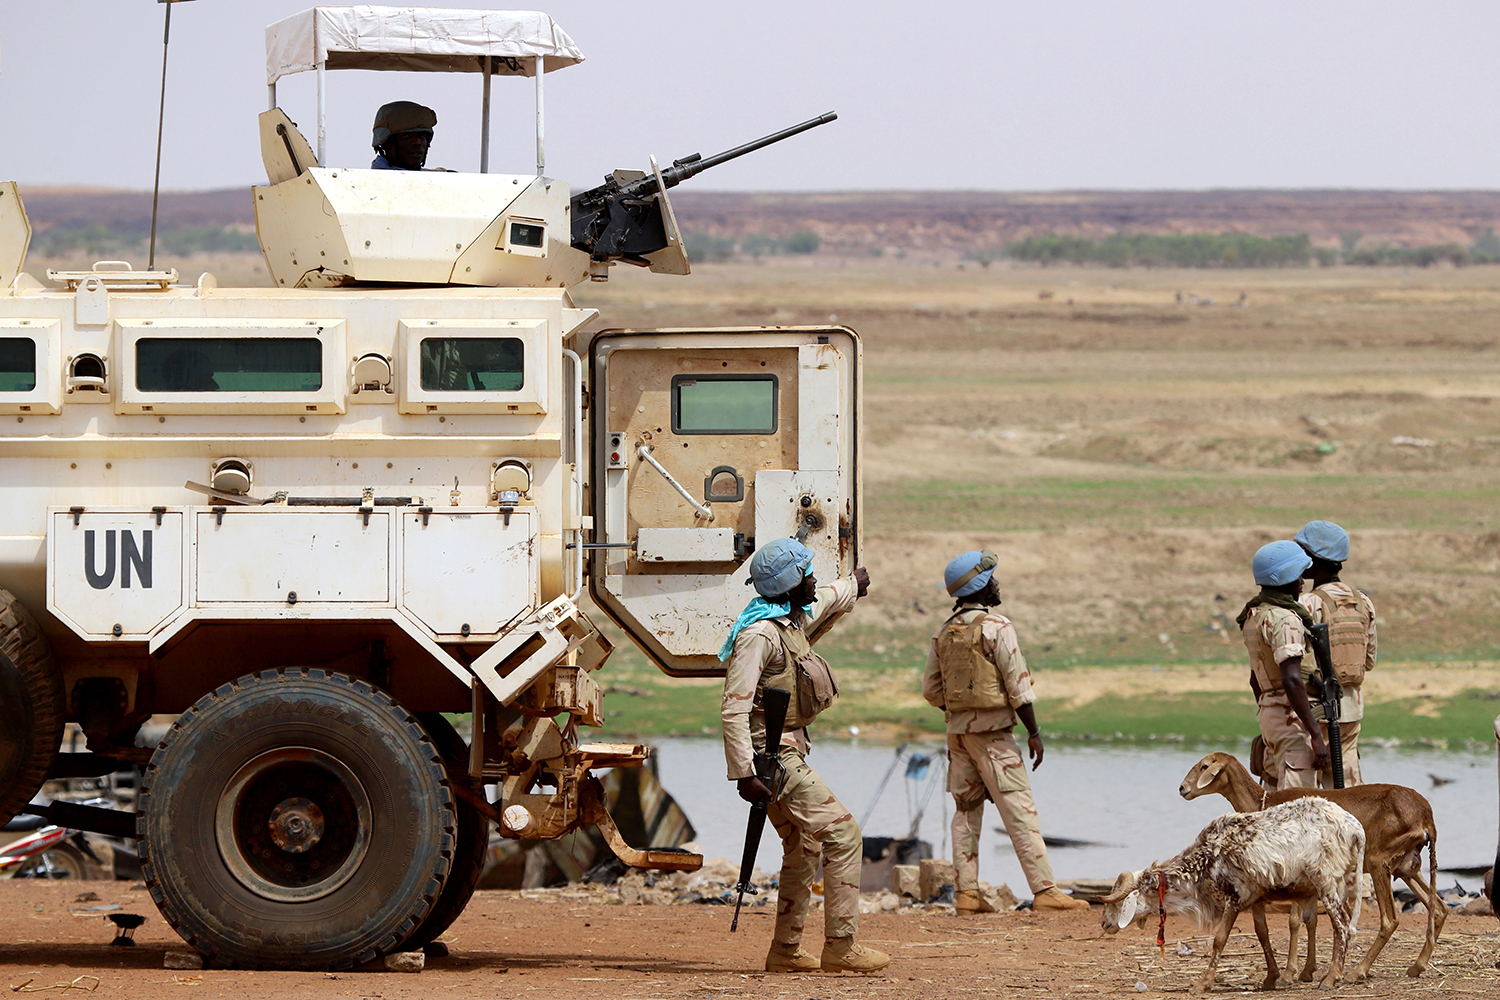 U.N. peacekeepers dismount an armored personnel carrier patrolling in the streets of Gao, Mali, on July 24, 2019, the day after a suicide bombing.